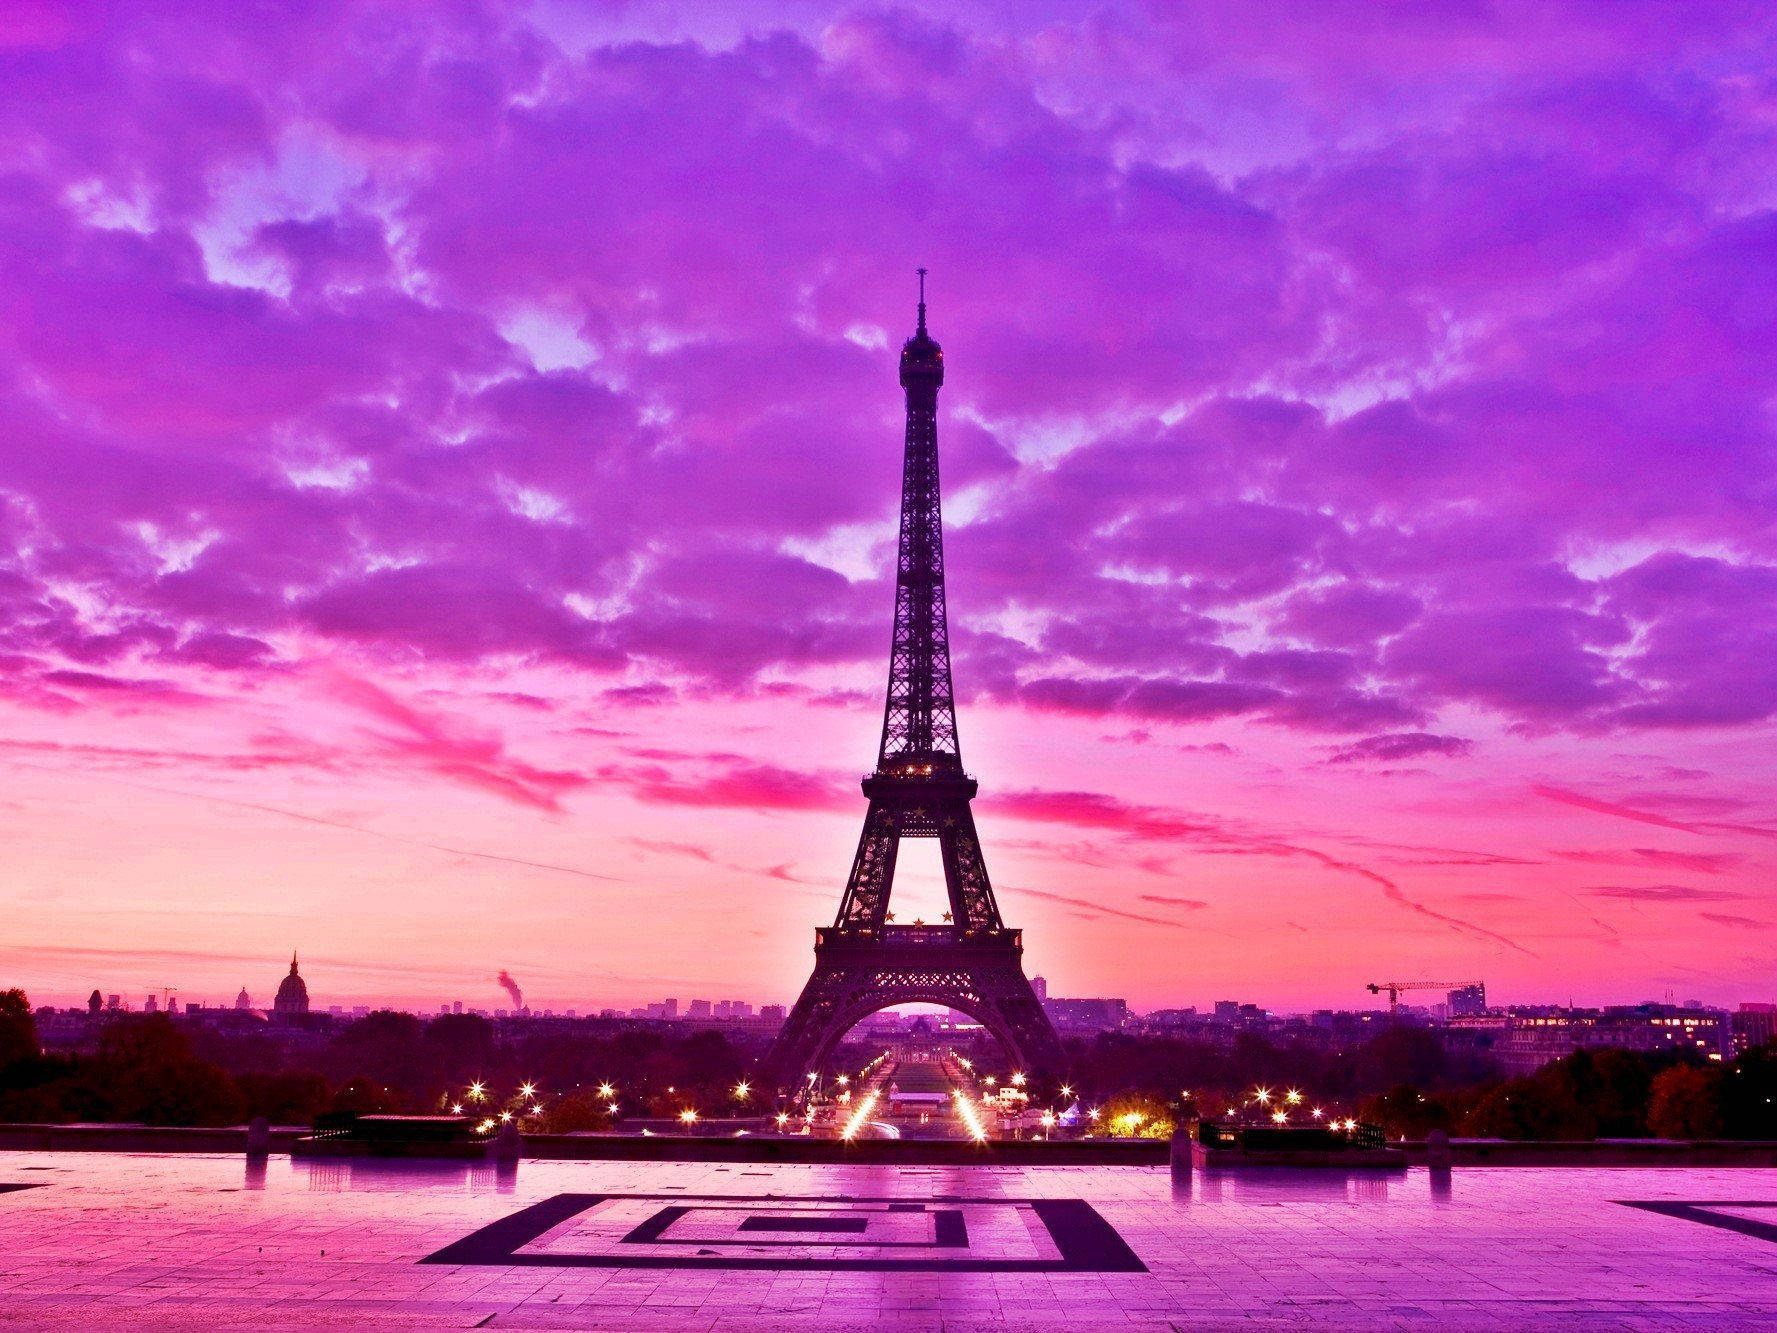 Pink Eiffel Tower Painting Wallpaper